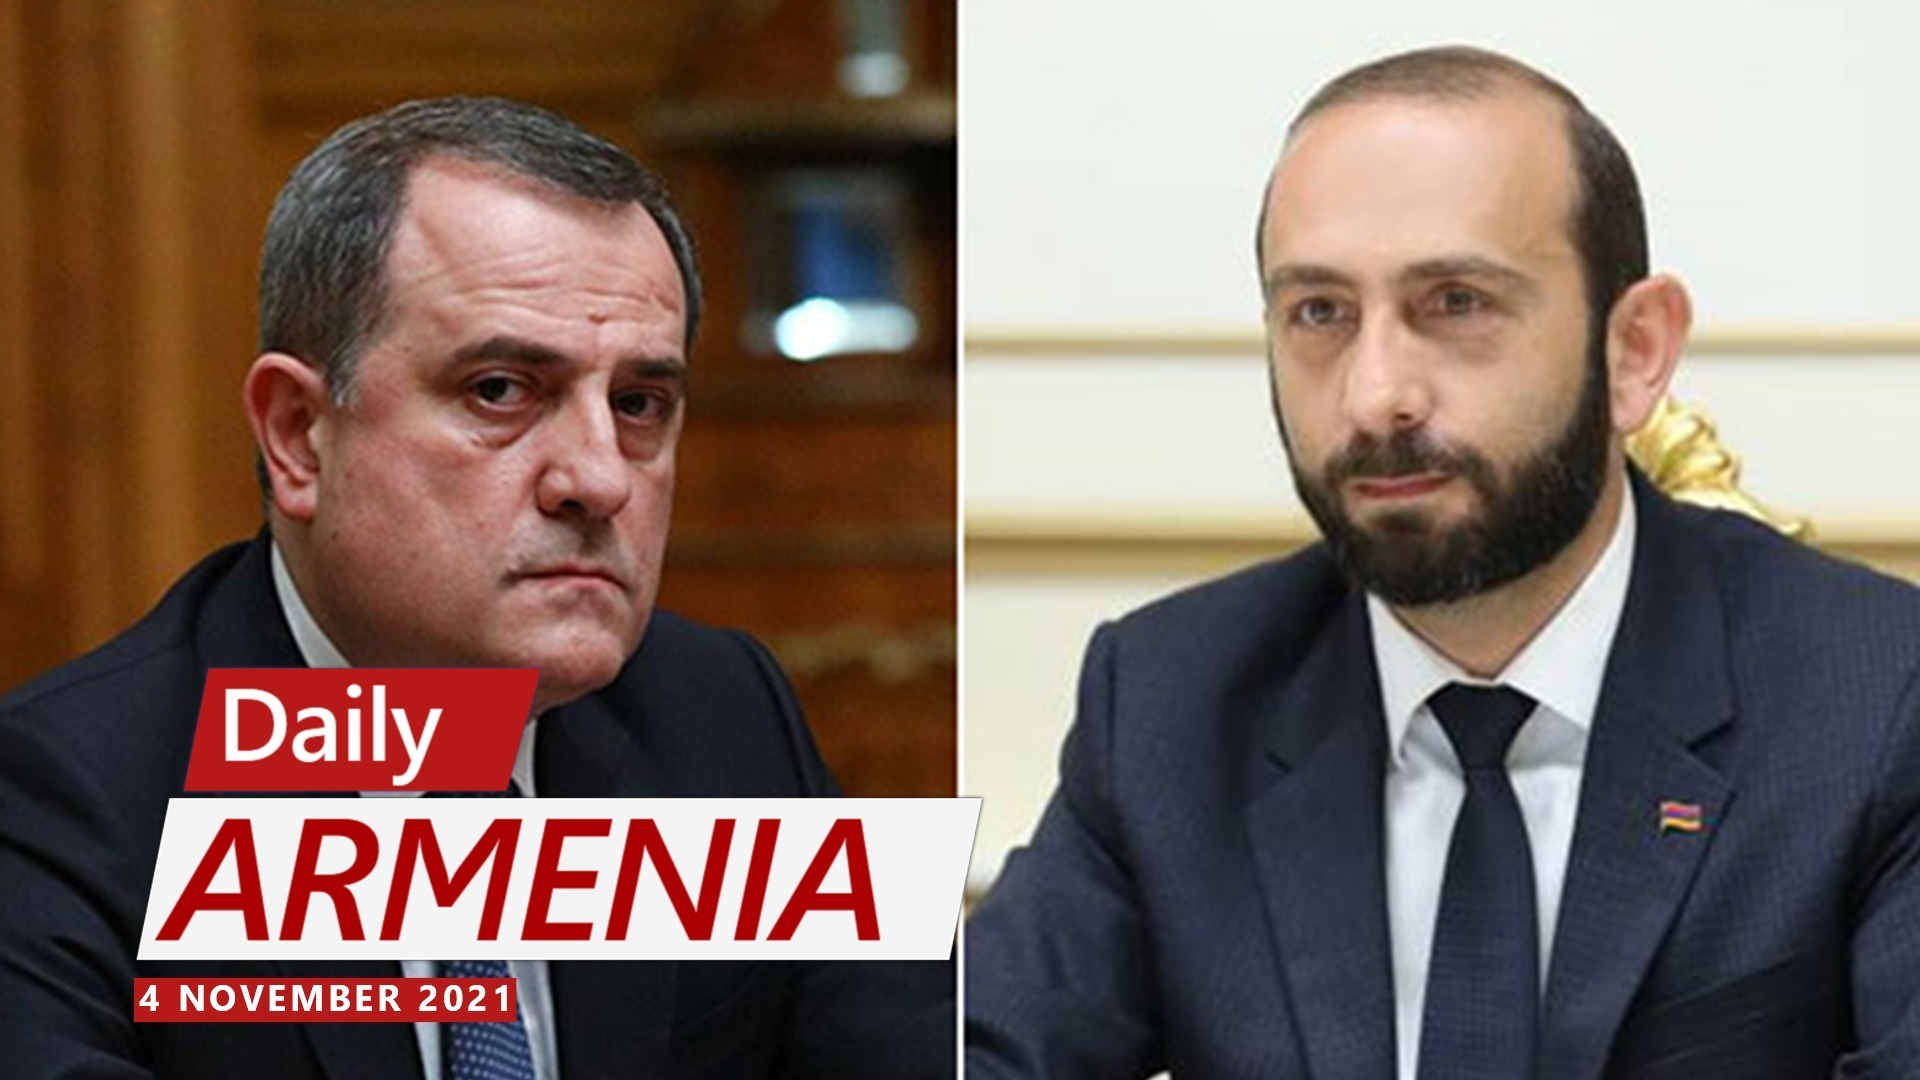 More meetings expected between Armenian and Azerbaijani foreign ministers, says Armenian official